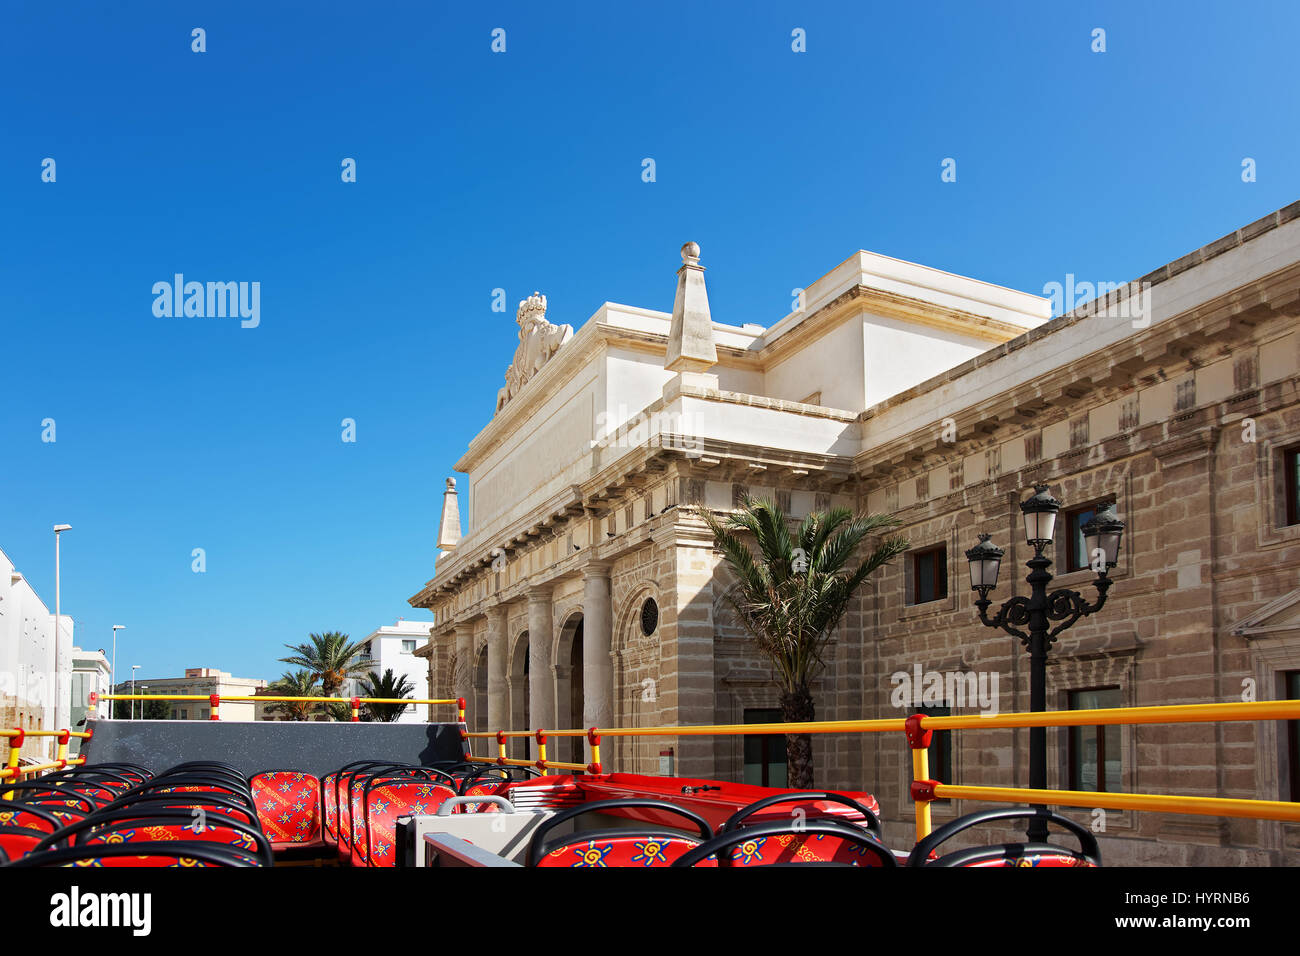 Royal Prison building seen from the excursion bus, Cadiz of Andalusia, Spain. Stock Photo